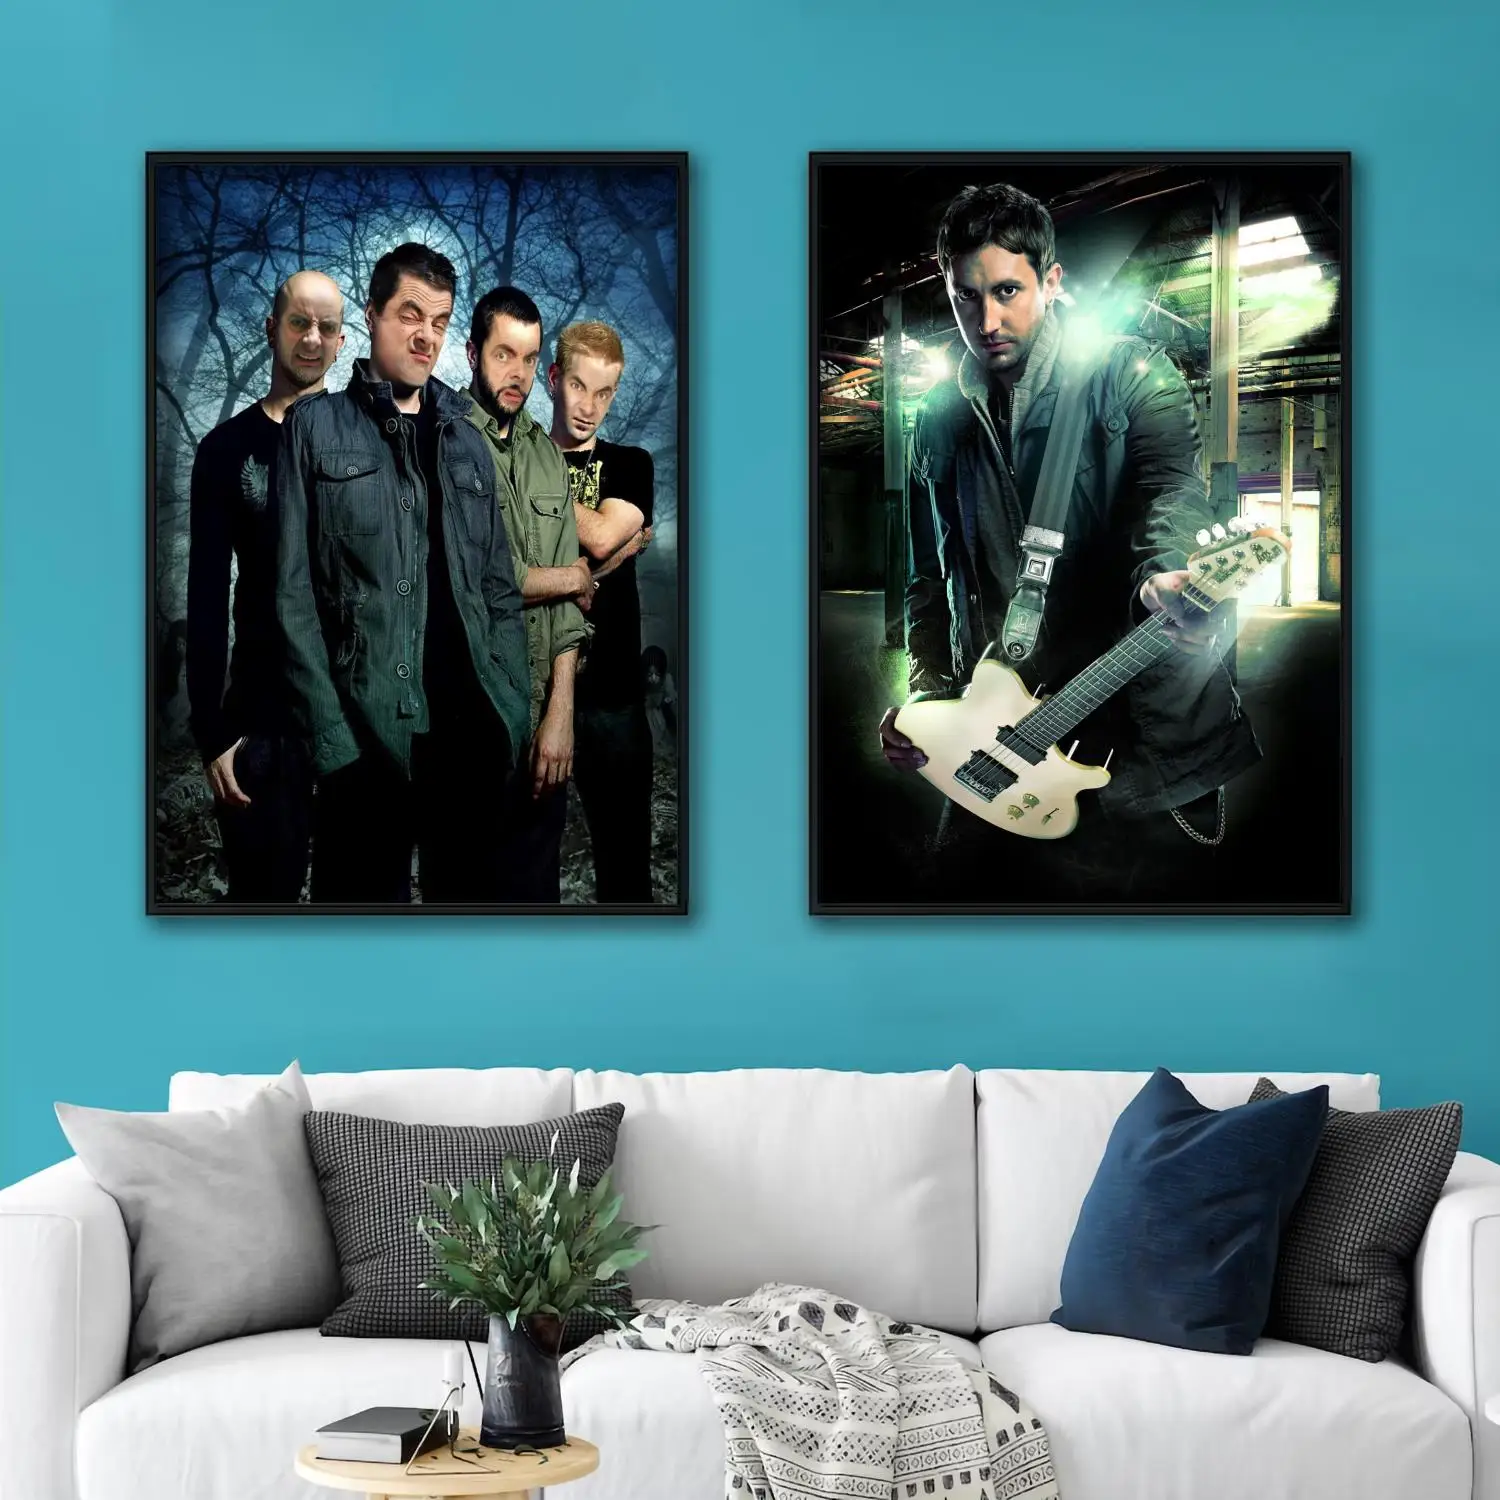 

breaking benjamin Singer Decorative Canvas Posters Room Bar Cafe Decor Gift Print Art Wall Paintings